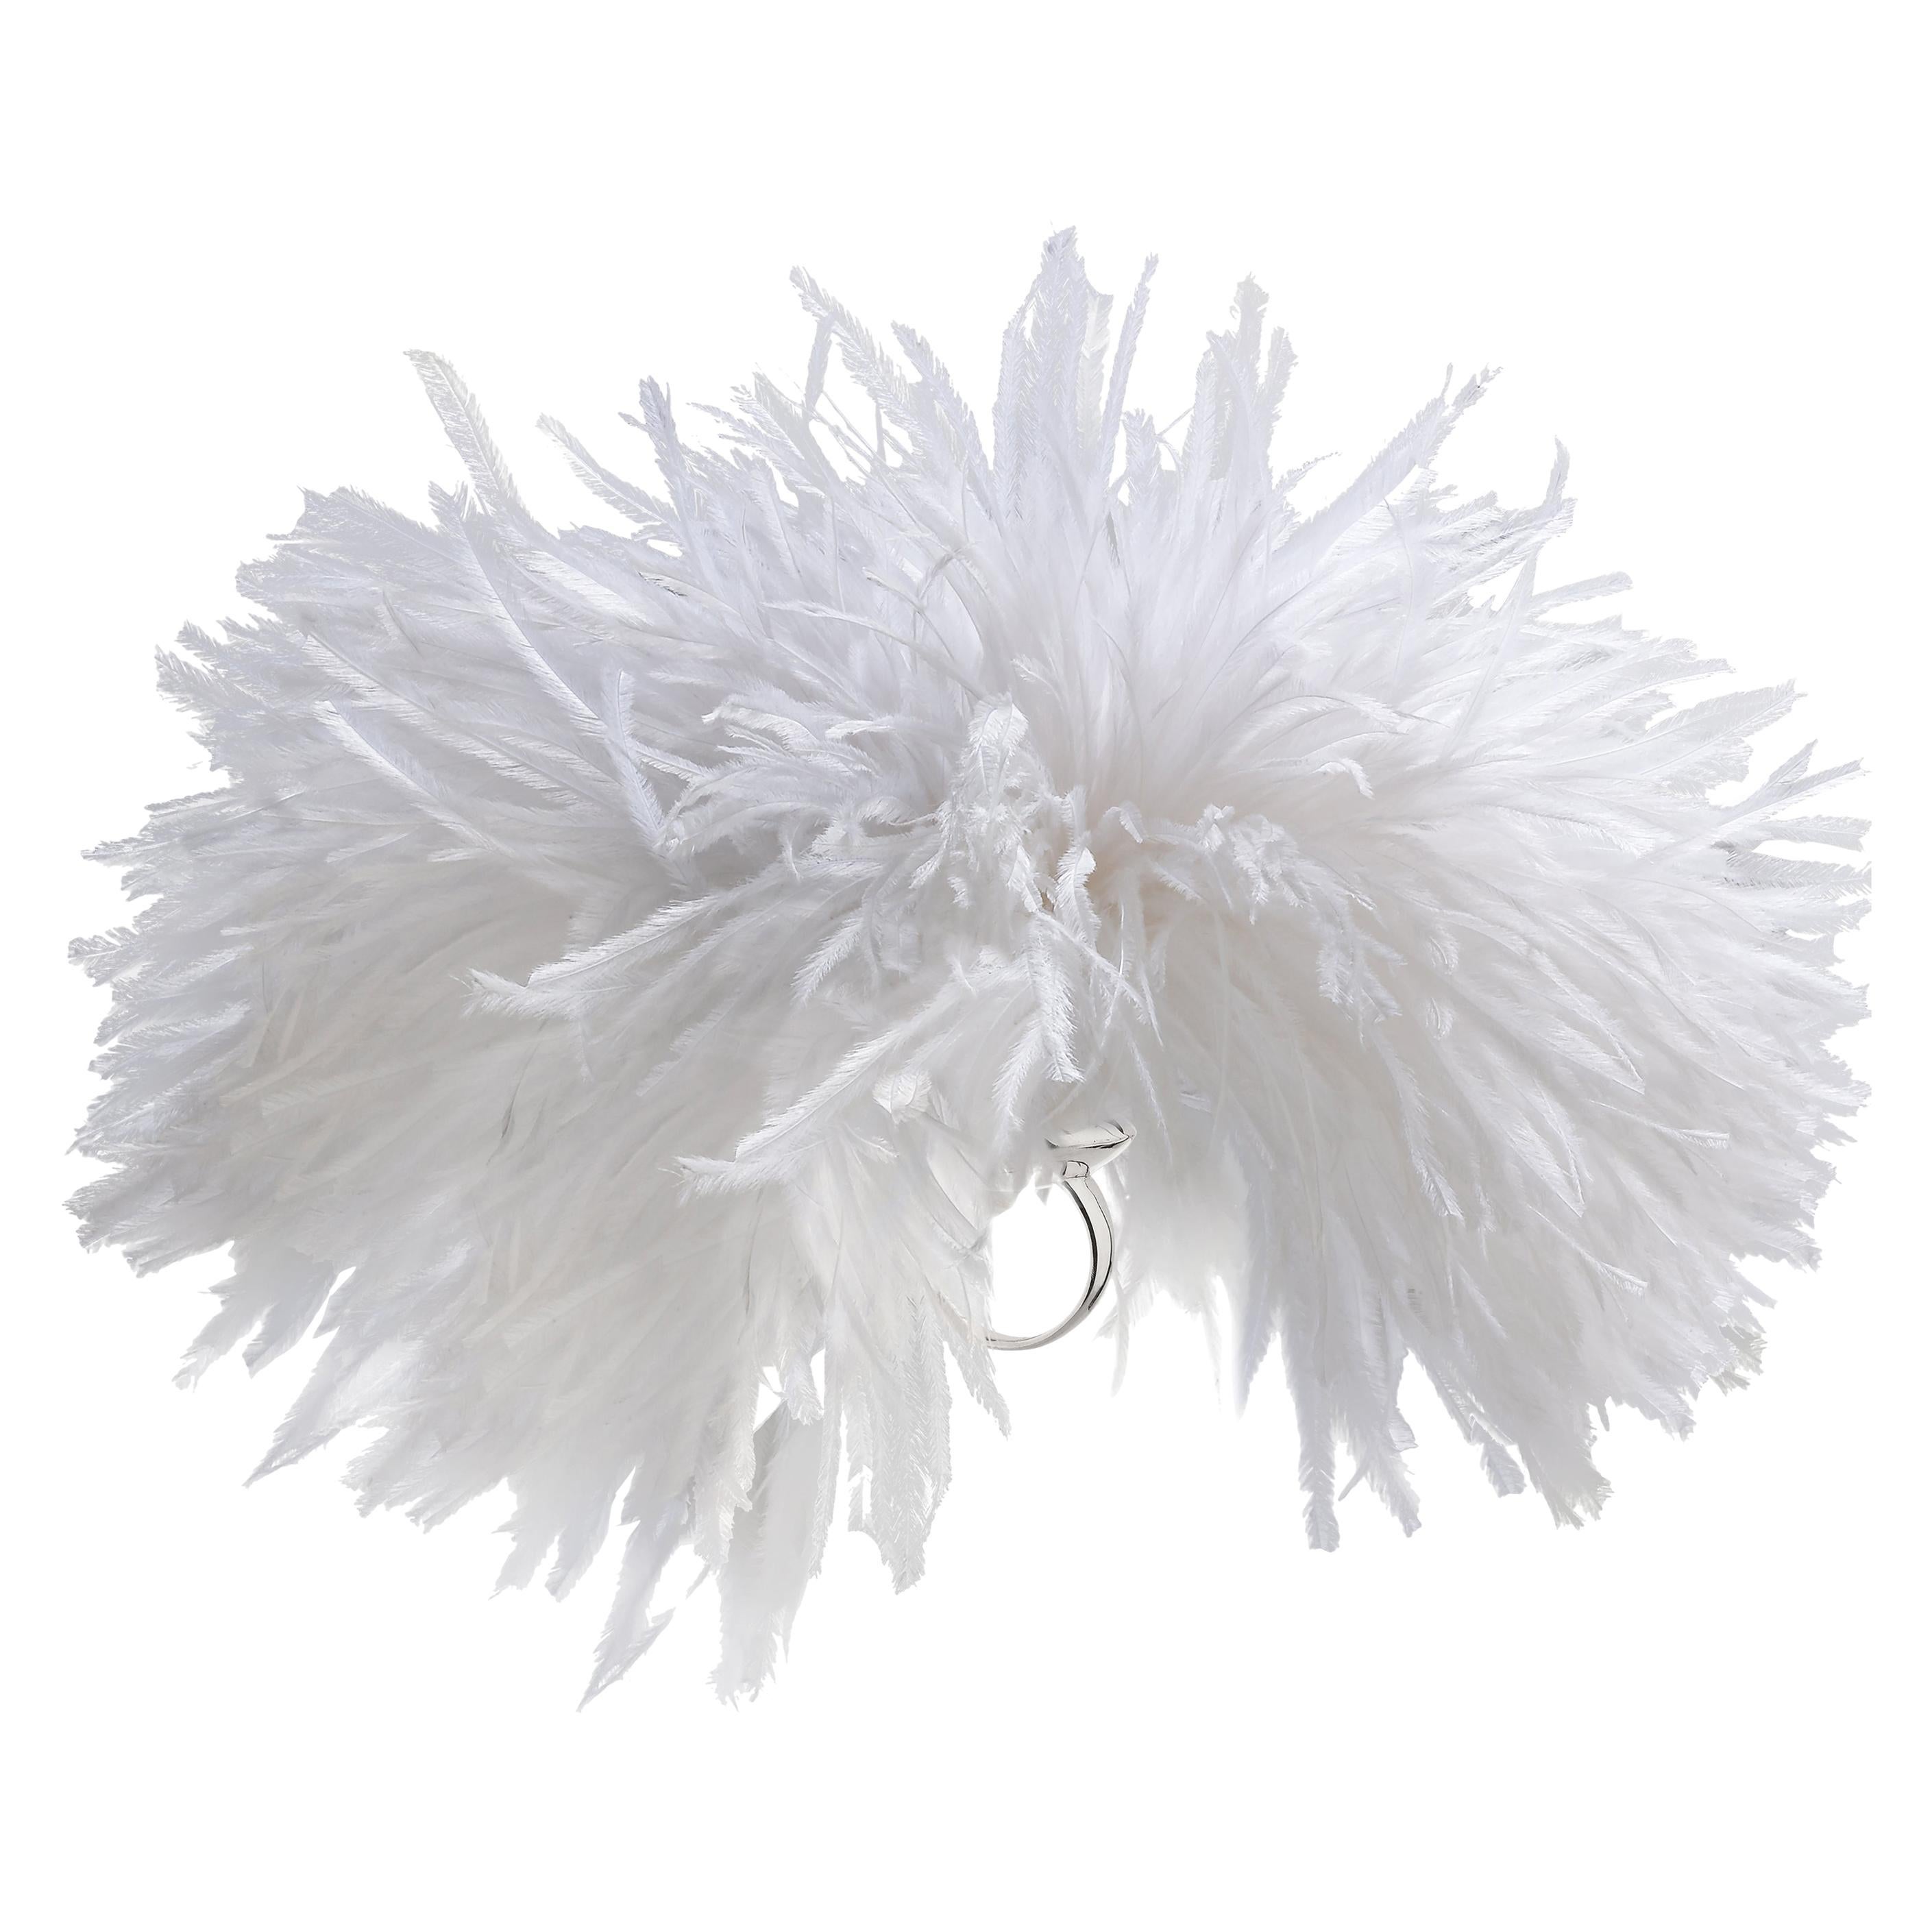 Betony Vernon "Ostrich Feather Puff" White Ring Sterling Silver 925 in Stock